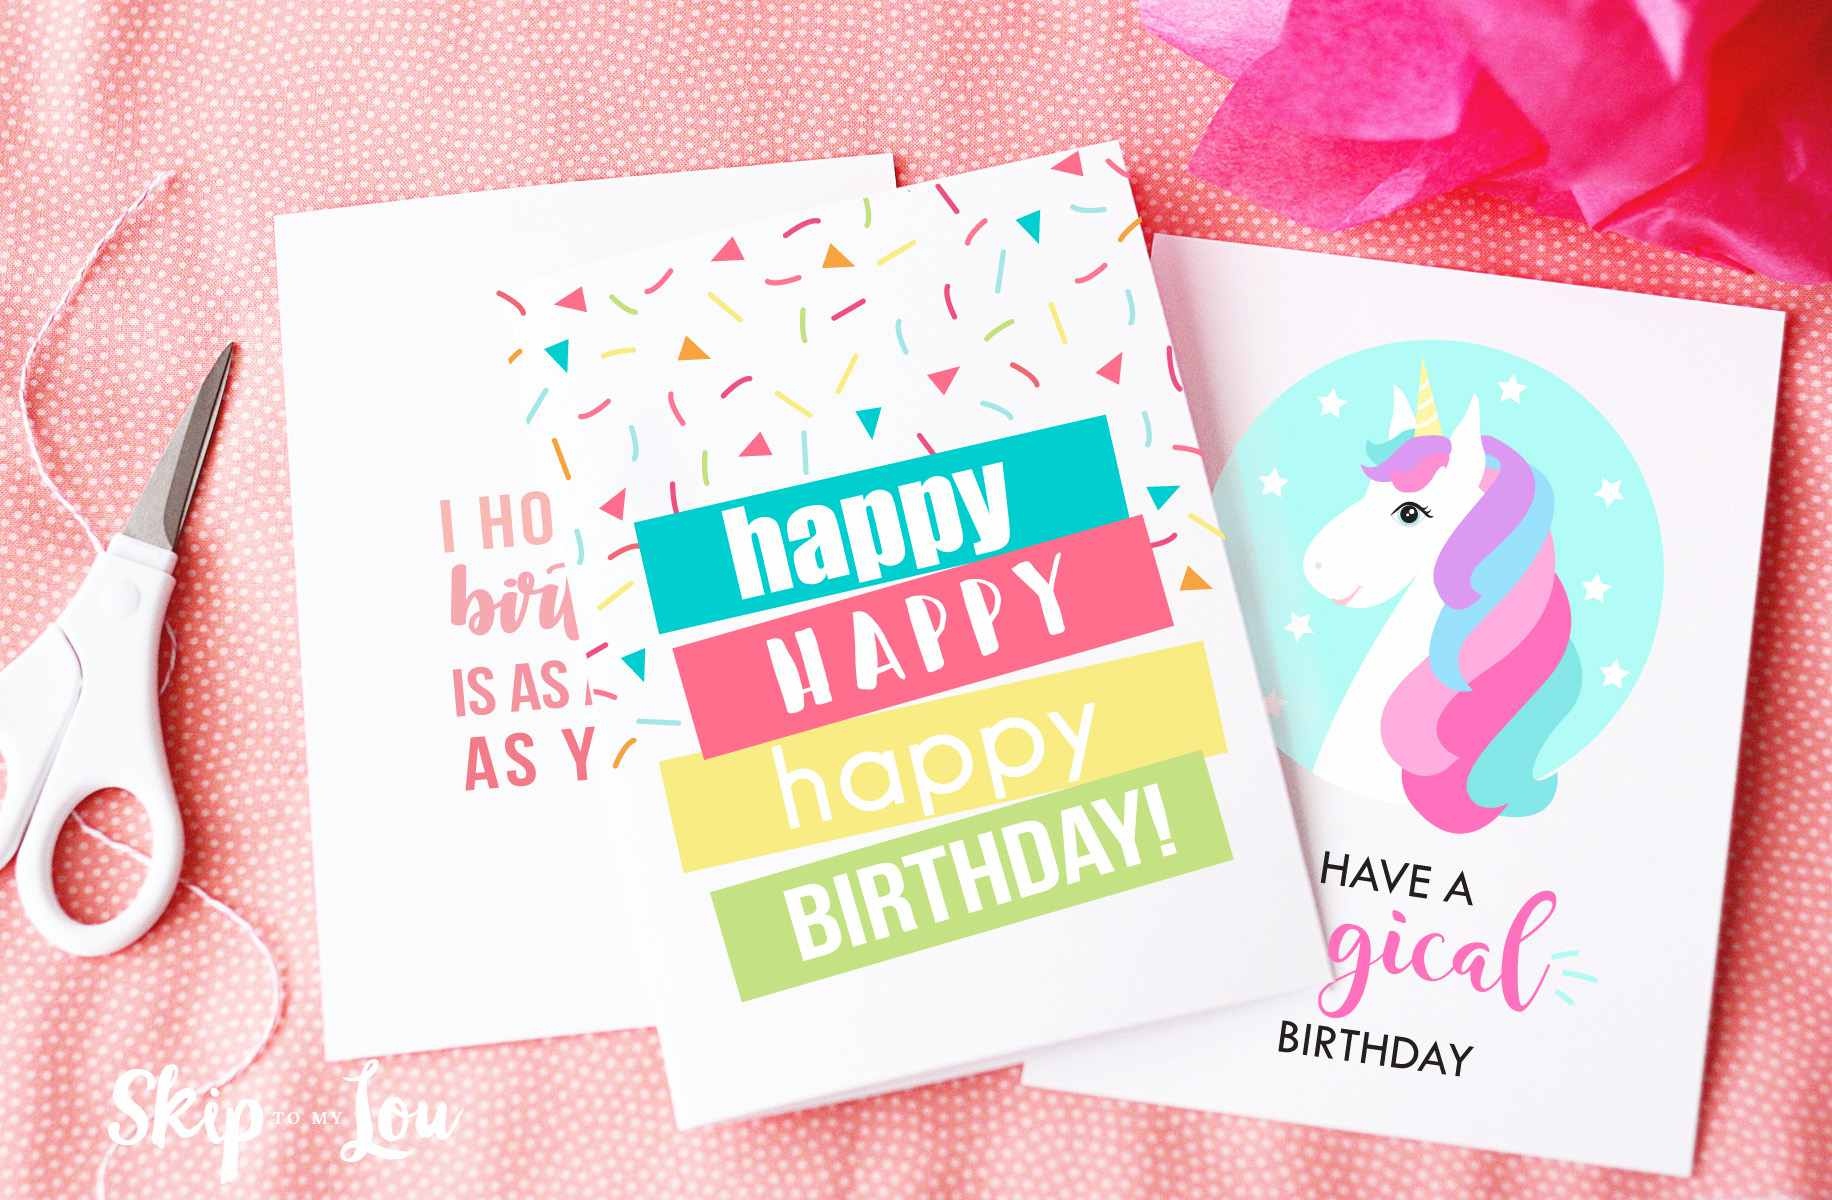 9 Free, Printable Birthday Cards For Everyone - Free Printable Birthday Cards For Her